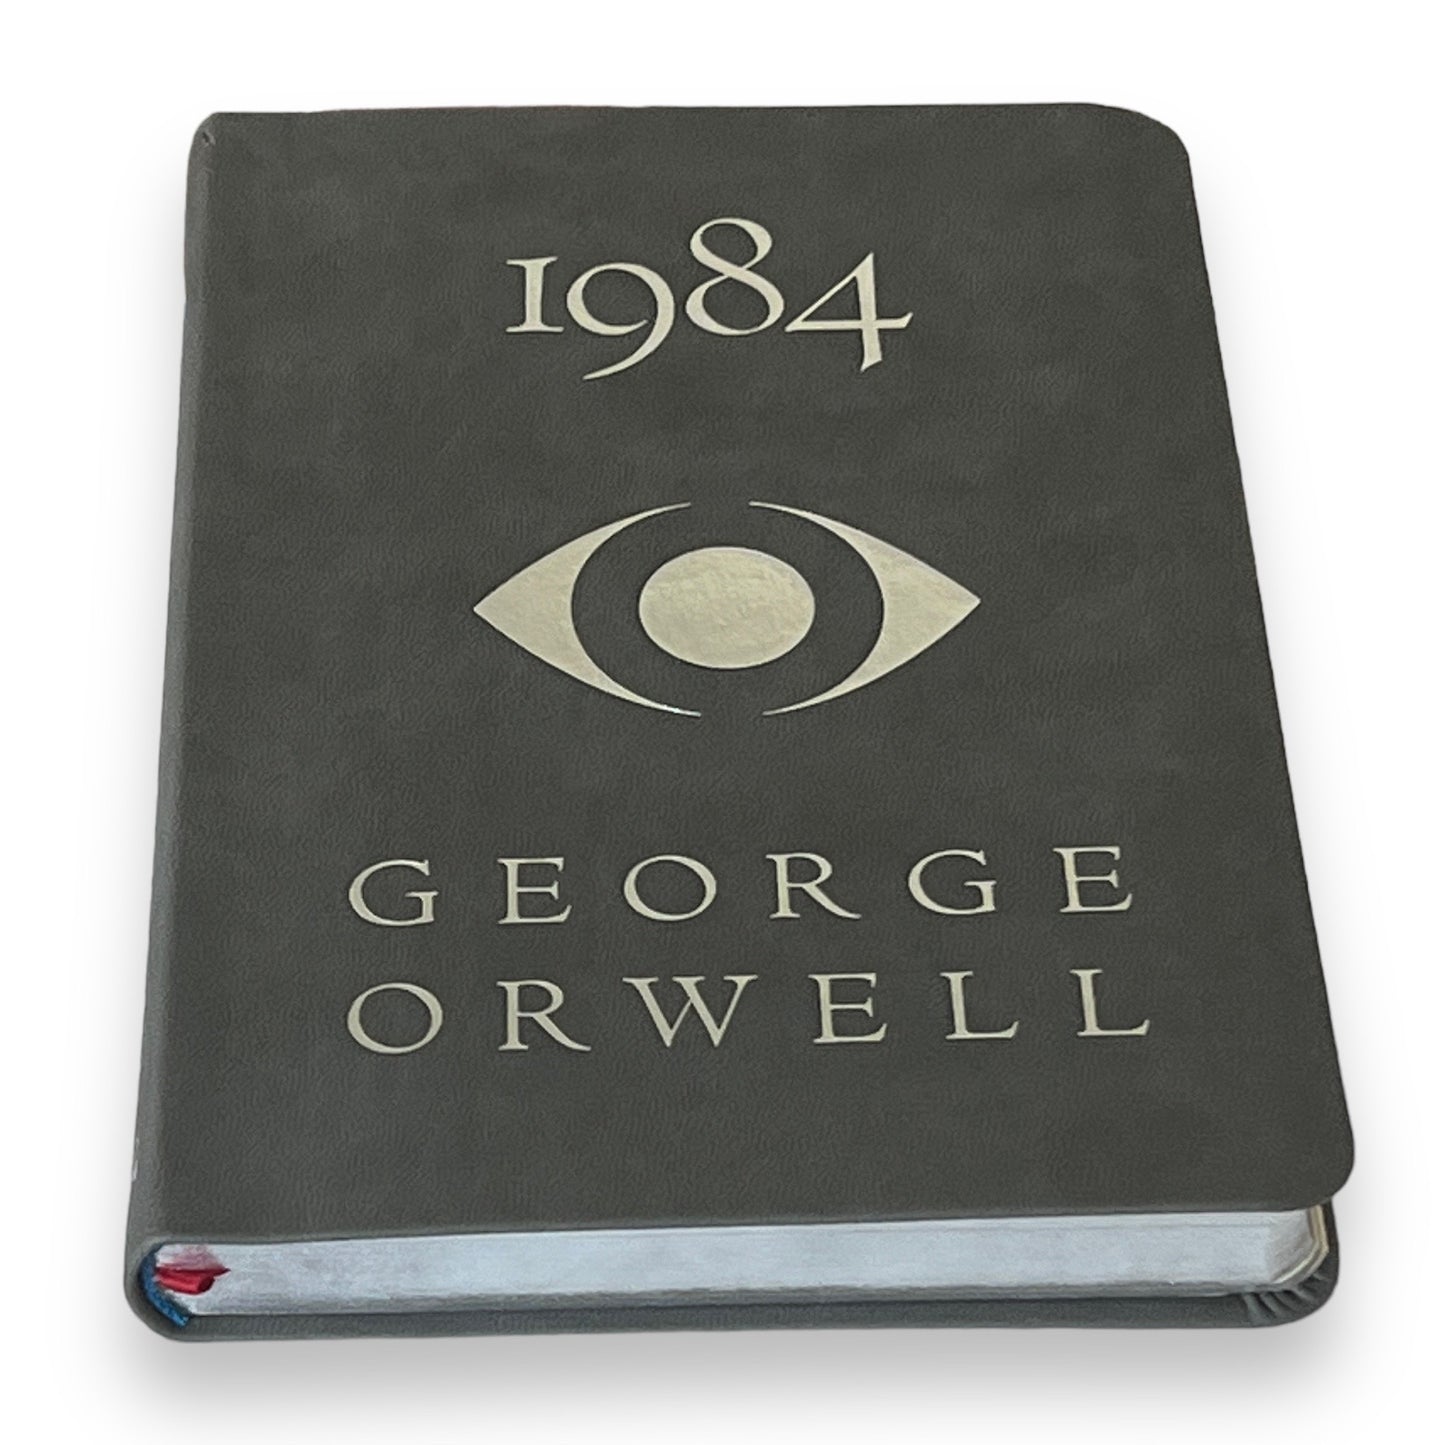 1984 Nineteen Eighty-Four by GEORGE ORWELL - Collectible Deluxe Gift Edition - Faux Leather - Home Decor - Classic Book